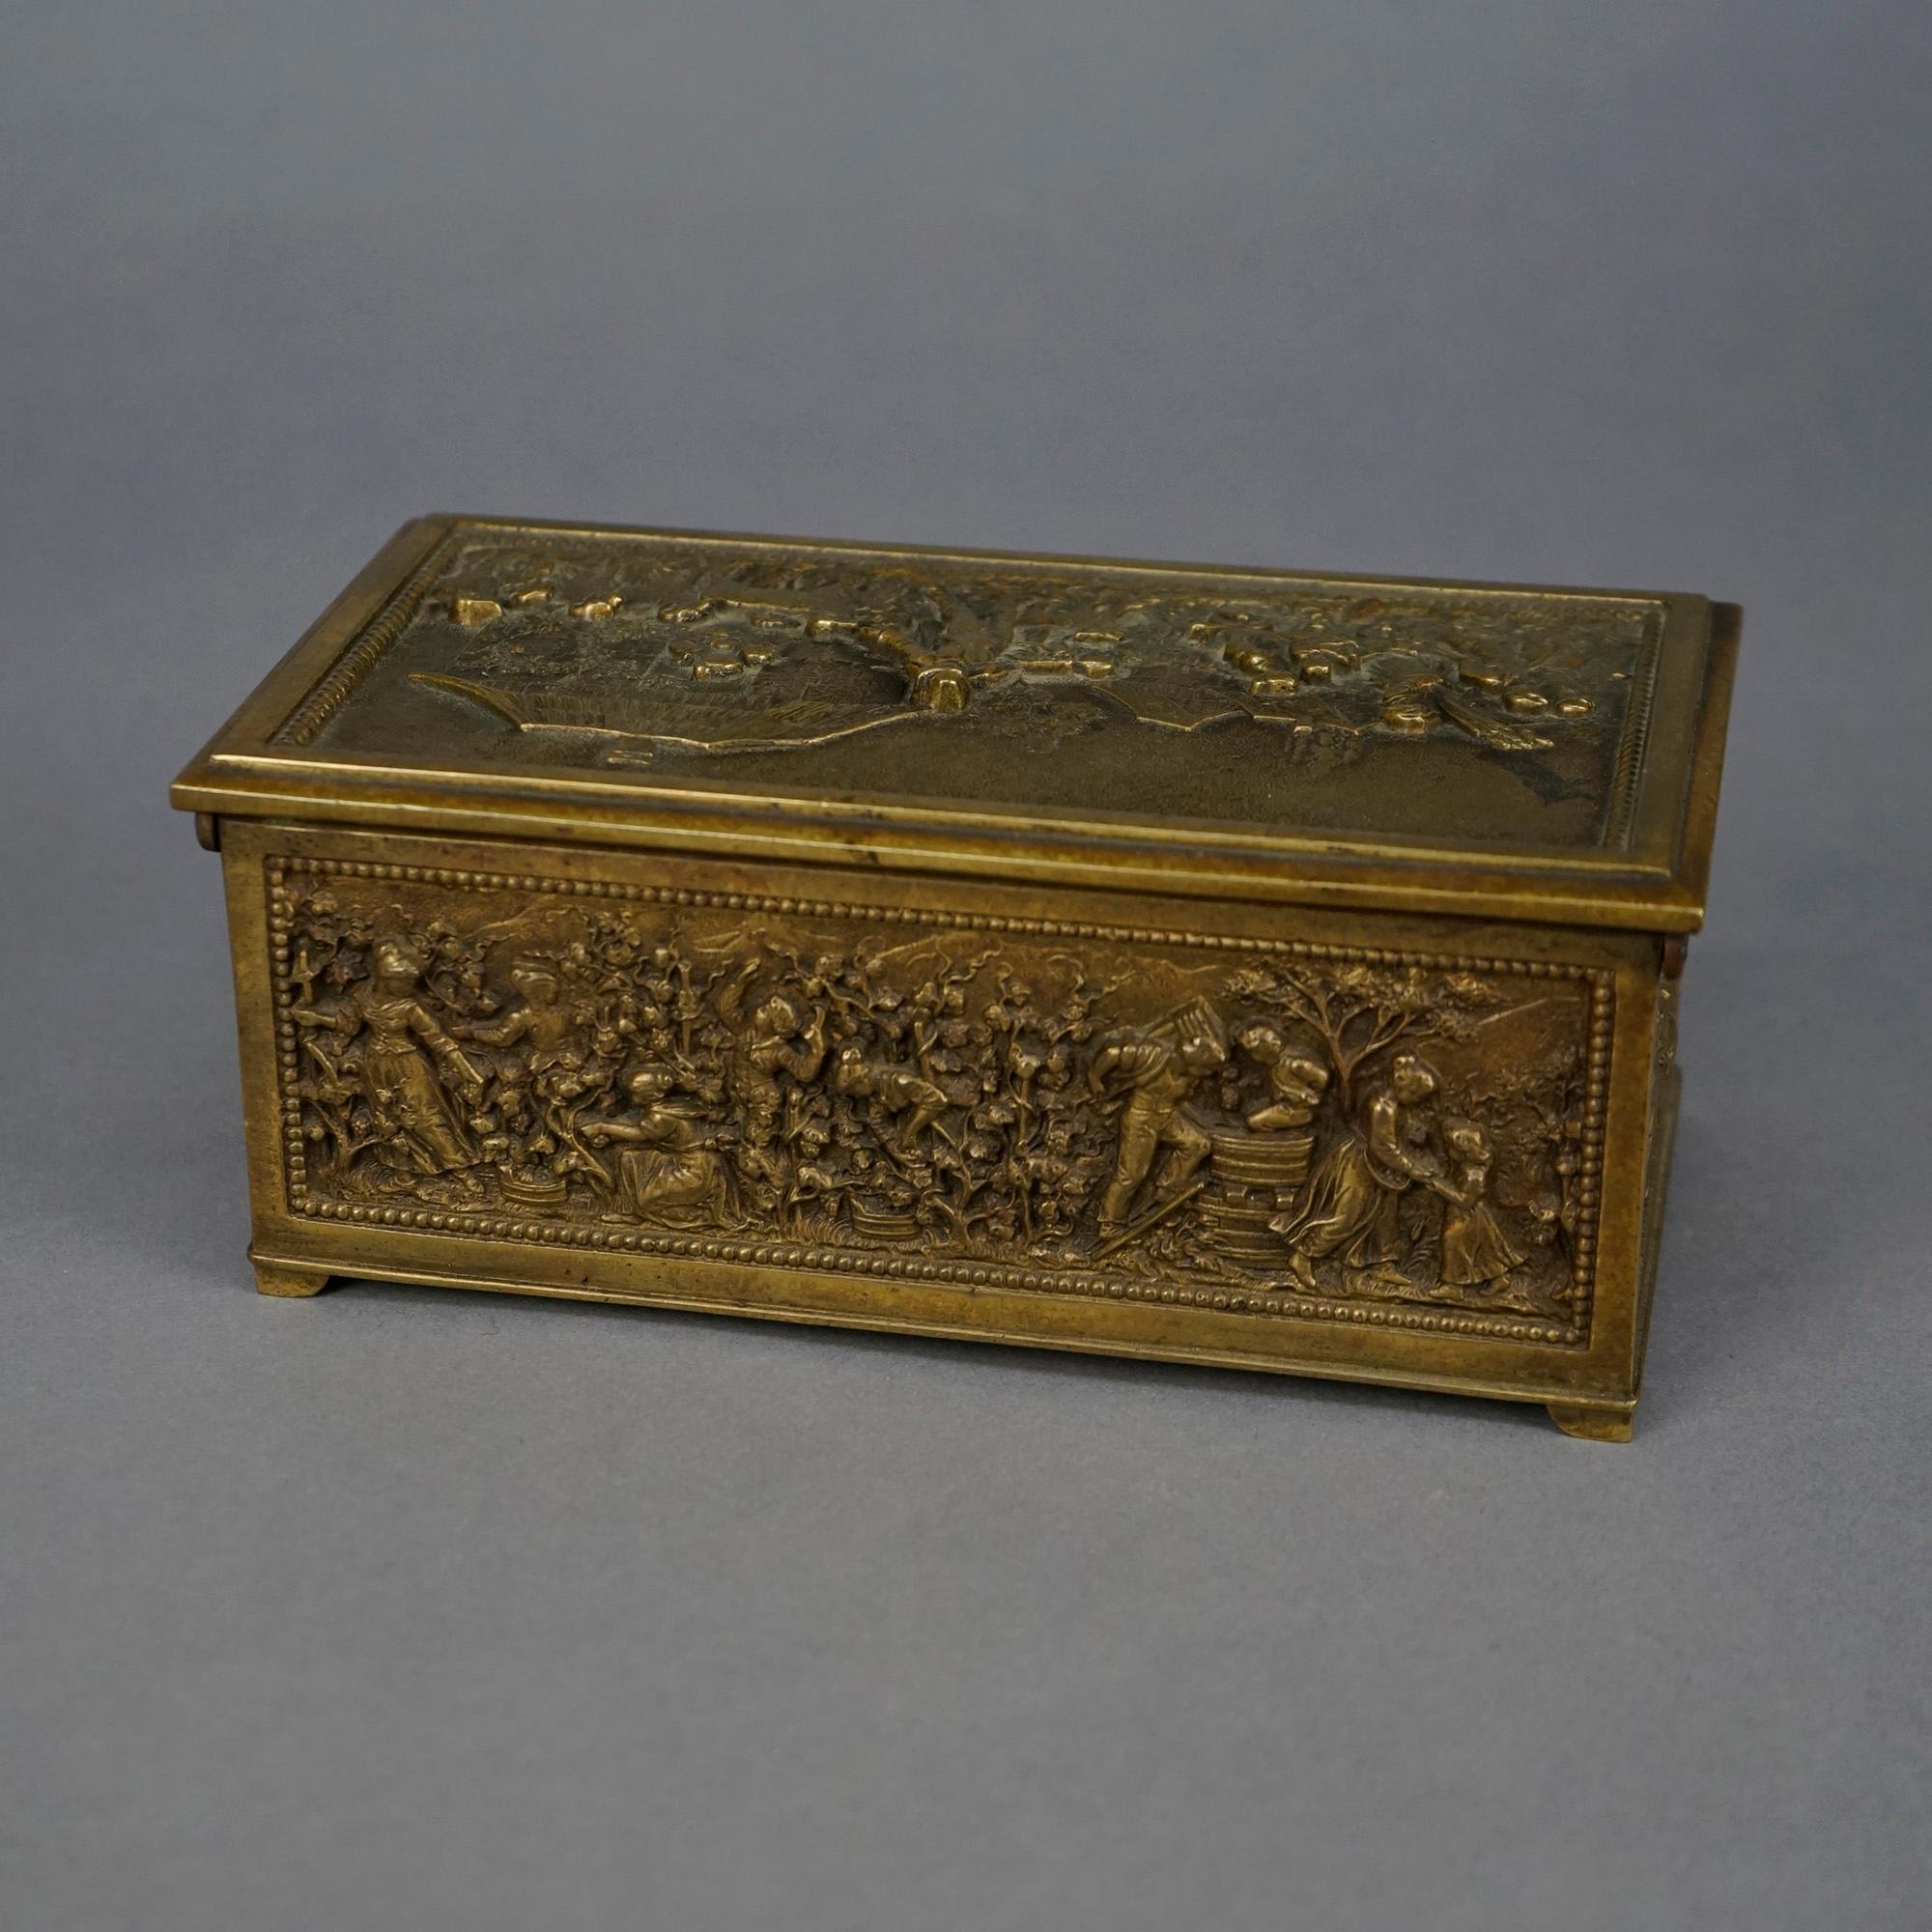 Cast Antique Bronze Box, Continental Genre Scene with Figures in High Relief 19th C